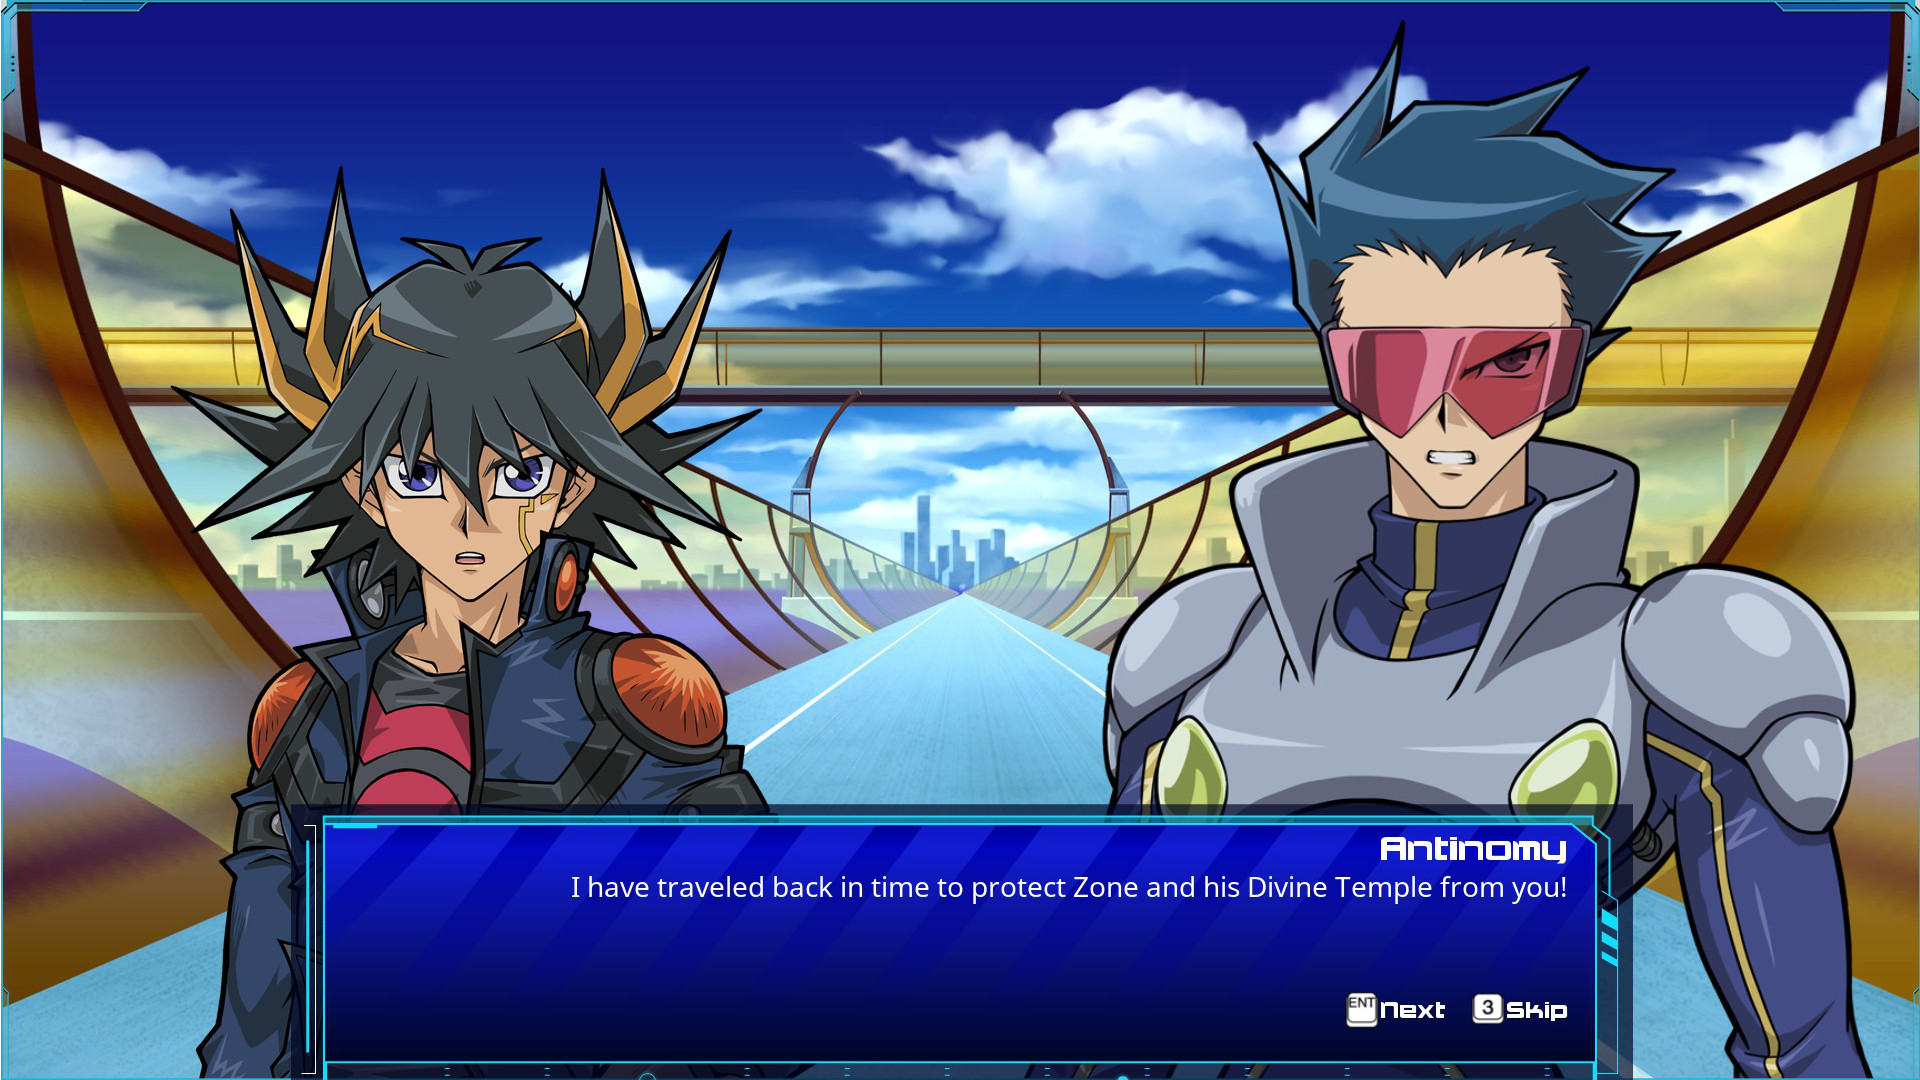 Yu-Gi-Oh! - 5D’s For the Future DLC Steam CD Key, $1.04